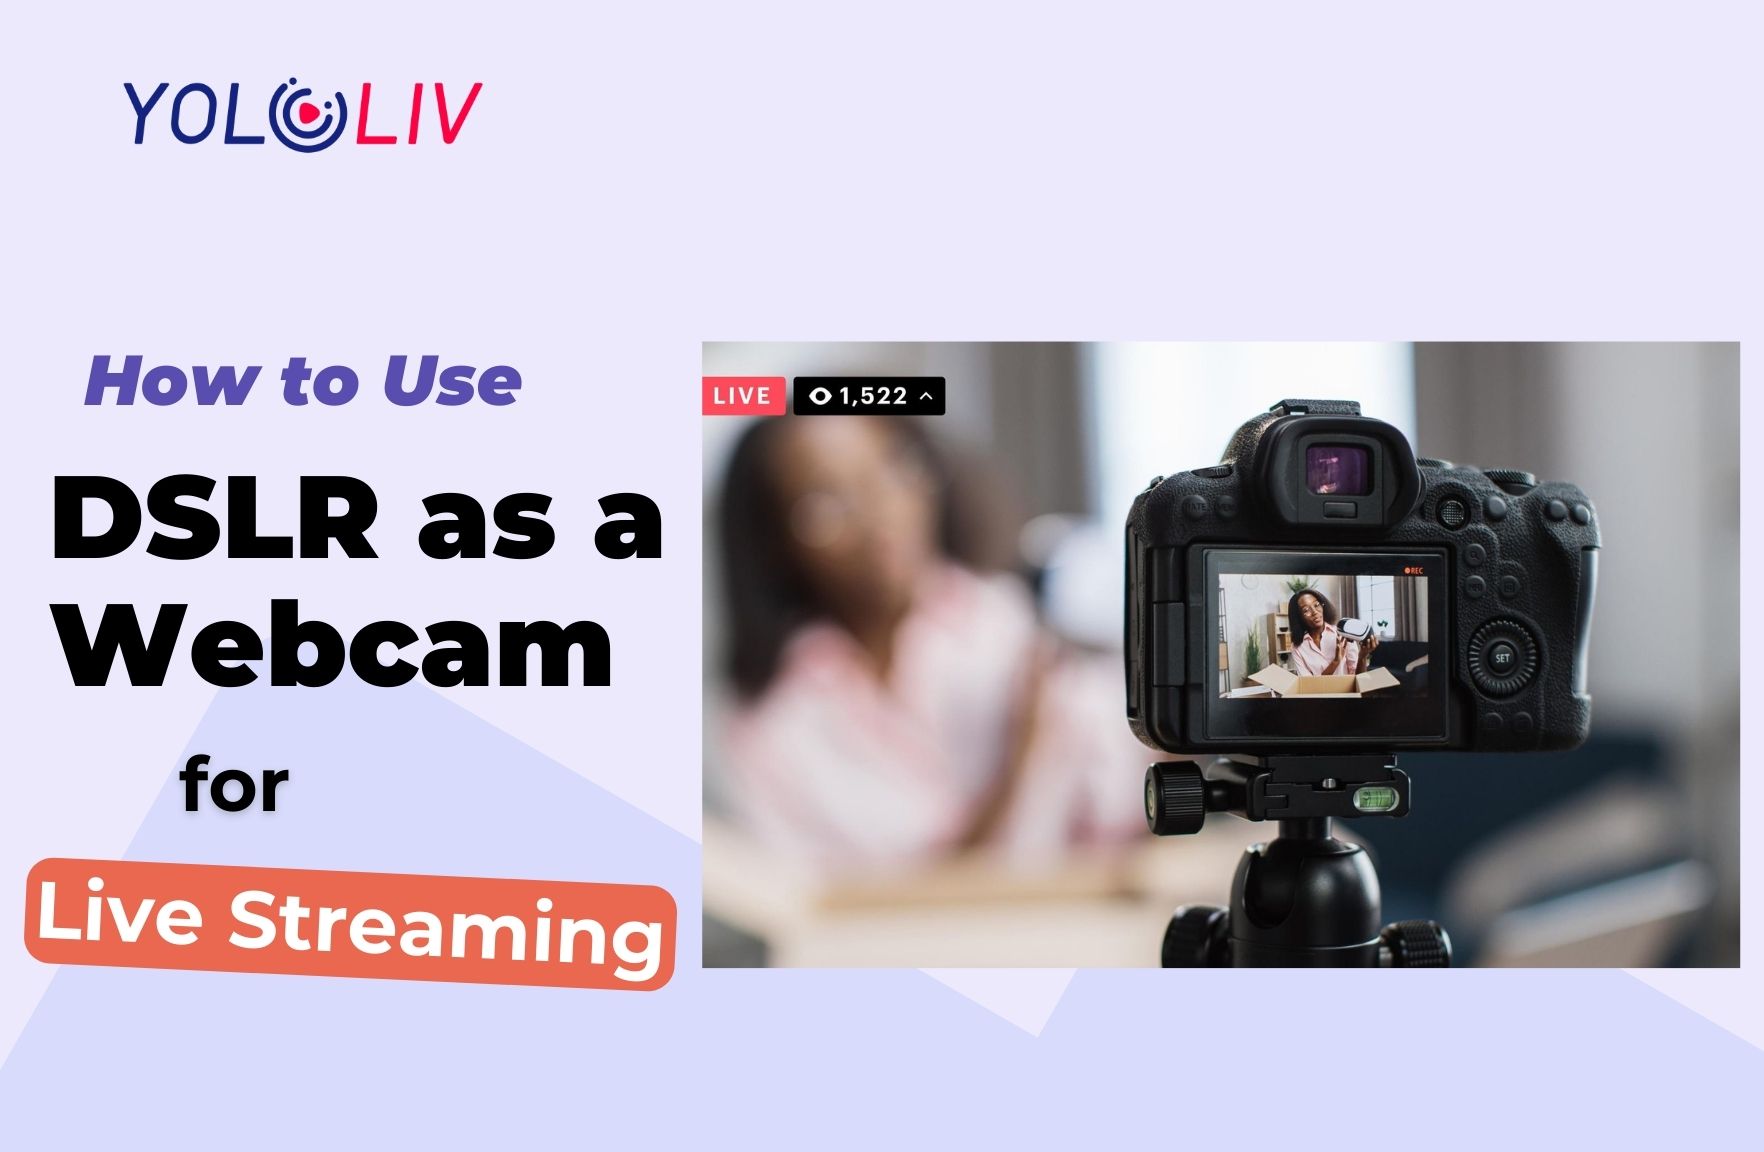 How to Use DSLR as a Webcam for Live Streaming